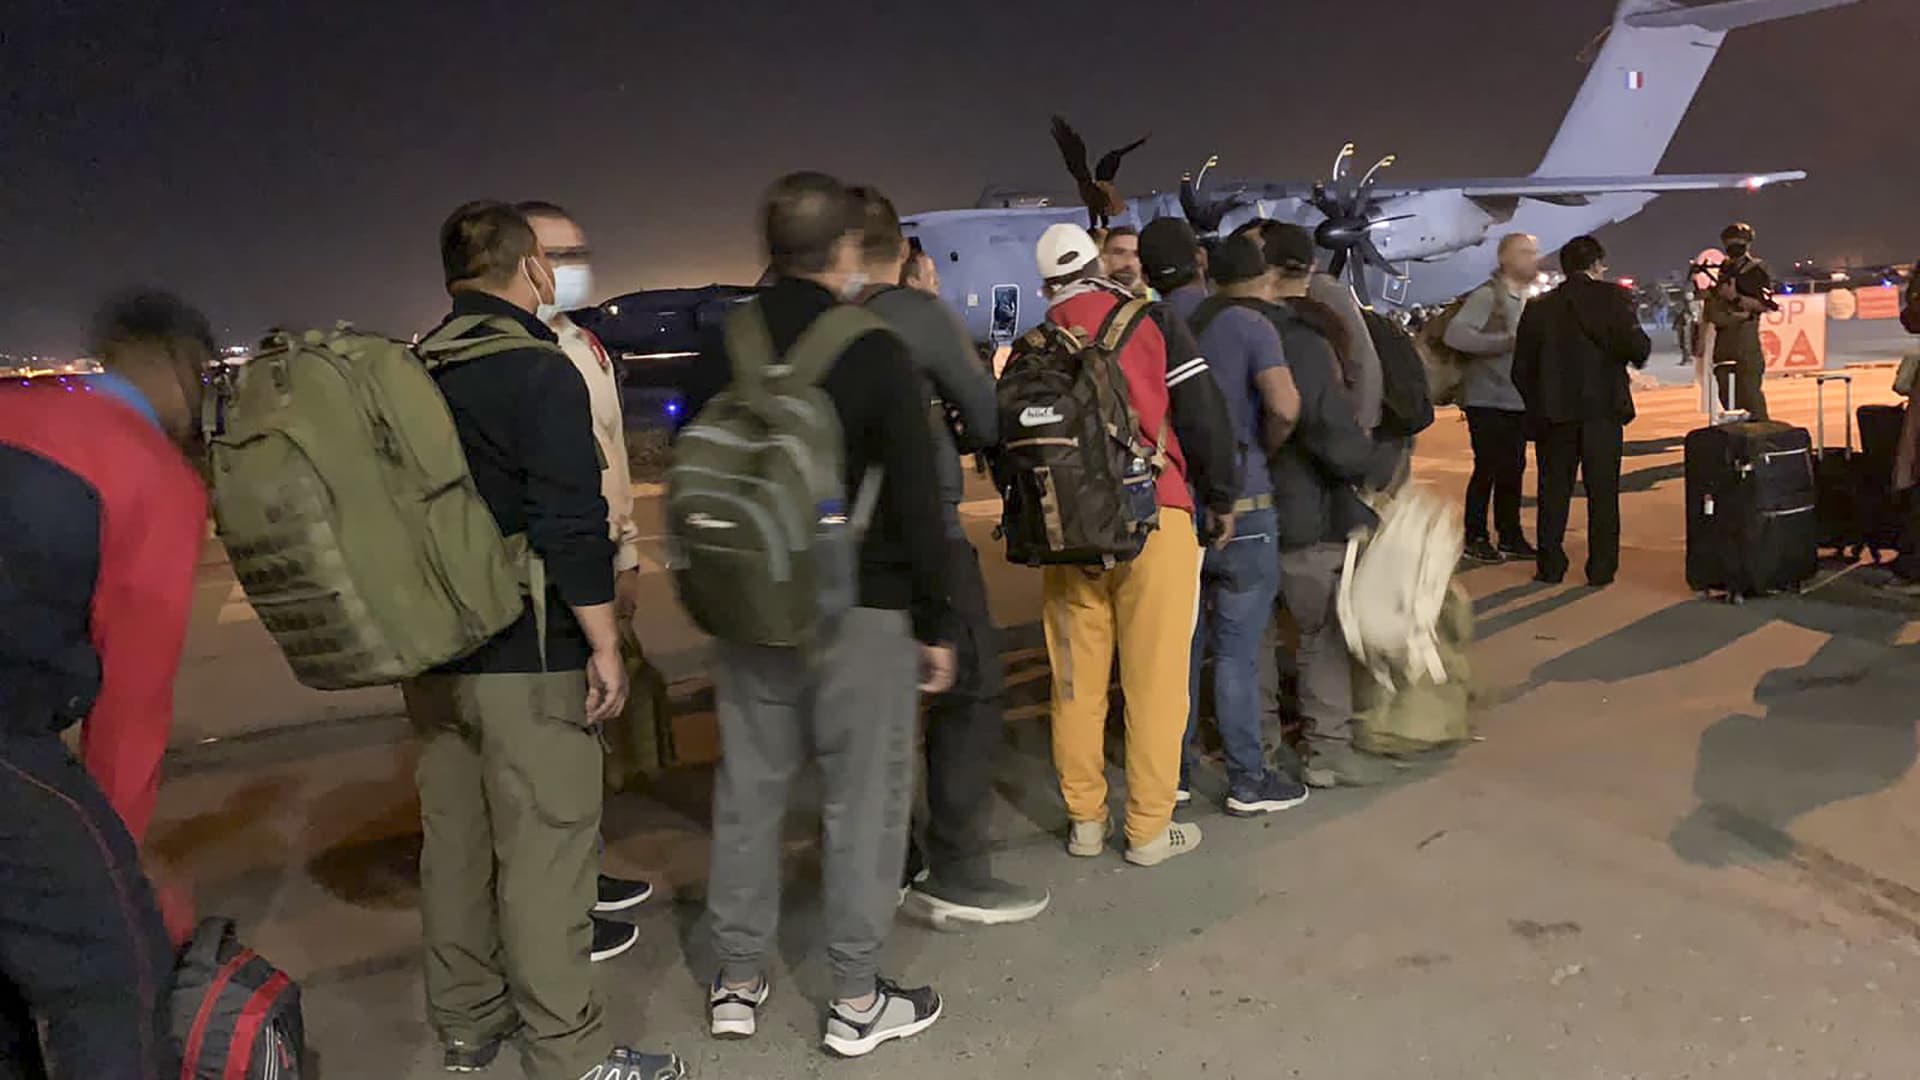 French and Afghan nationals line up to board a French military transport plane at the Kabul airport on August 17, 2021, for evacuation from Afghanistan after the Taliban's stunning military takeover of the country. (Photo by STR / AFP) (Photo by STR/AFP via Getty Images)